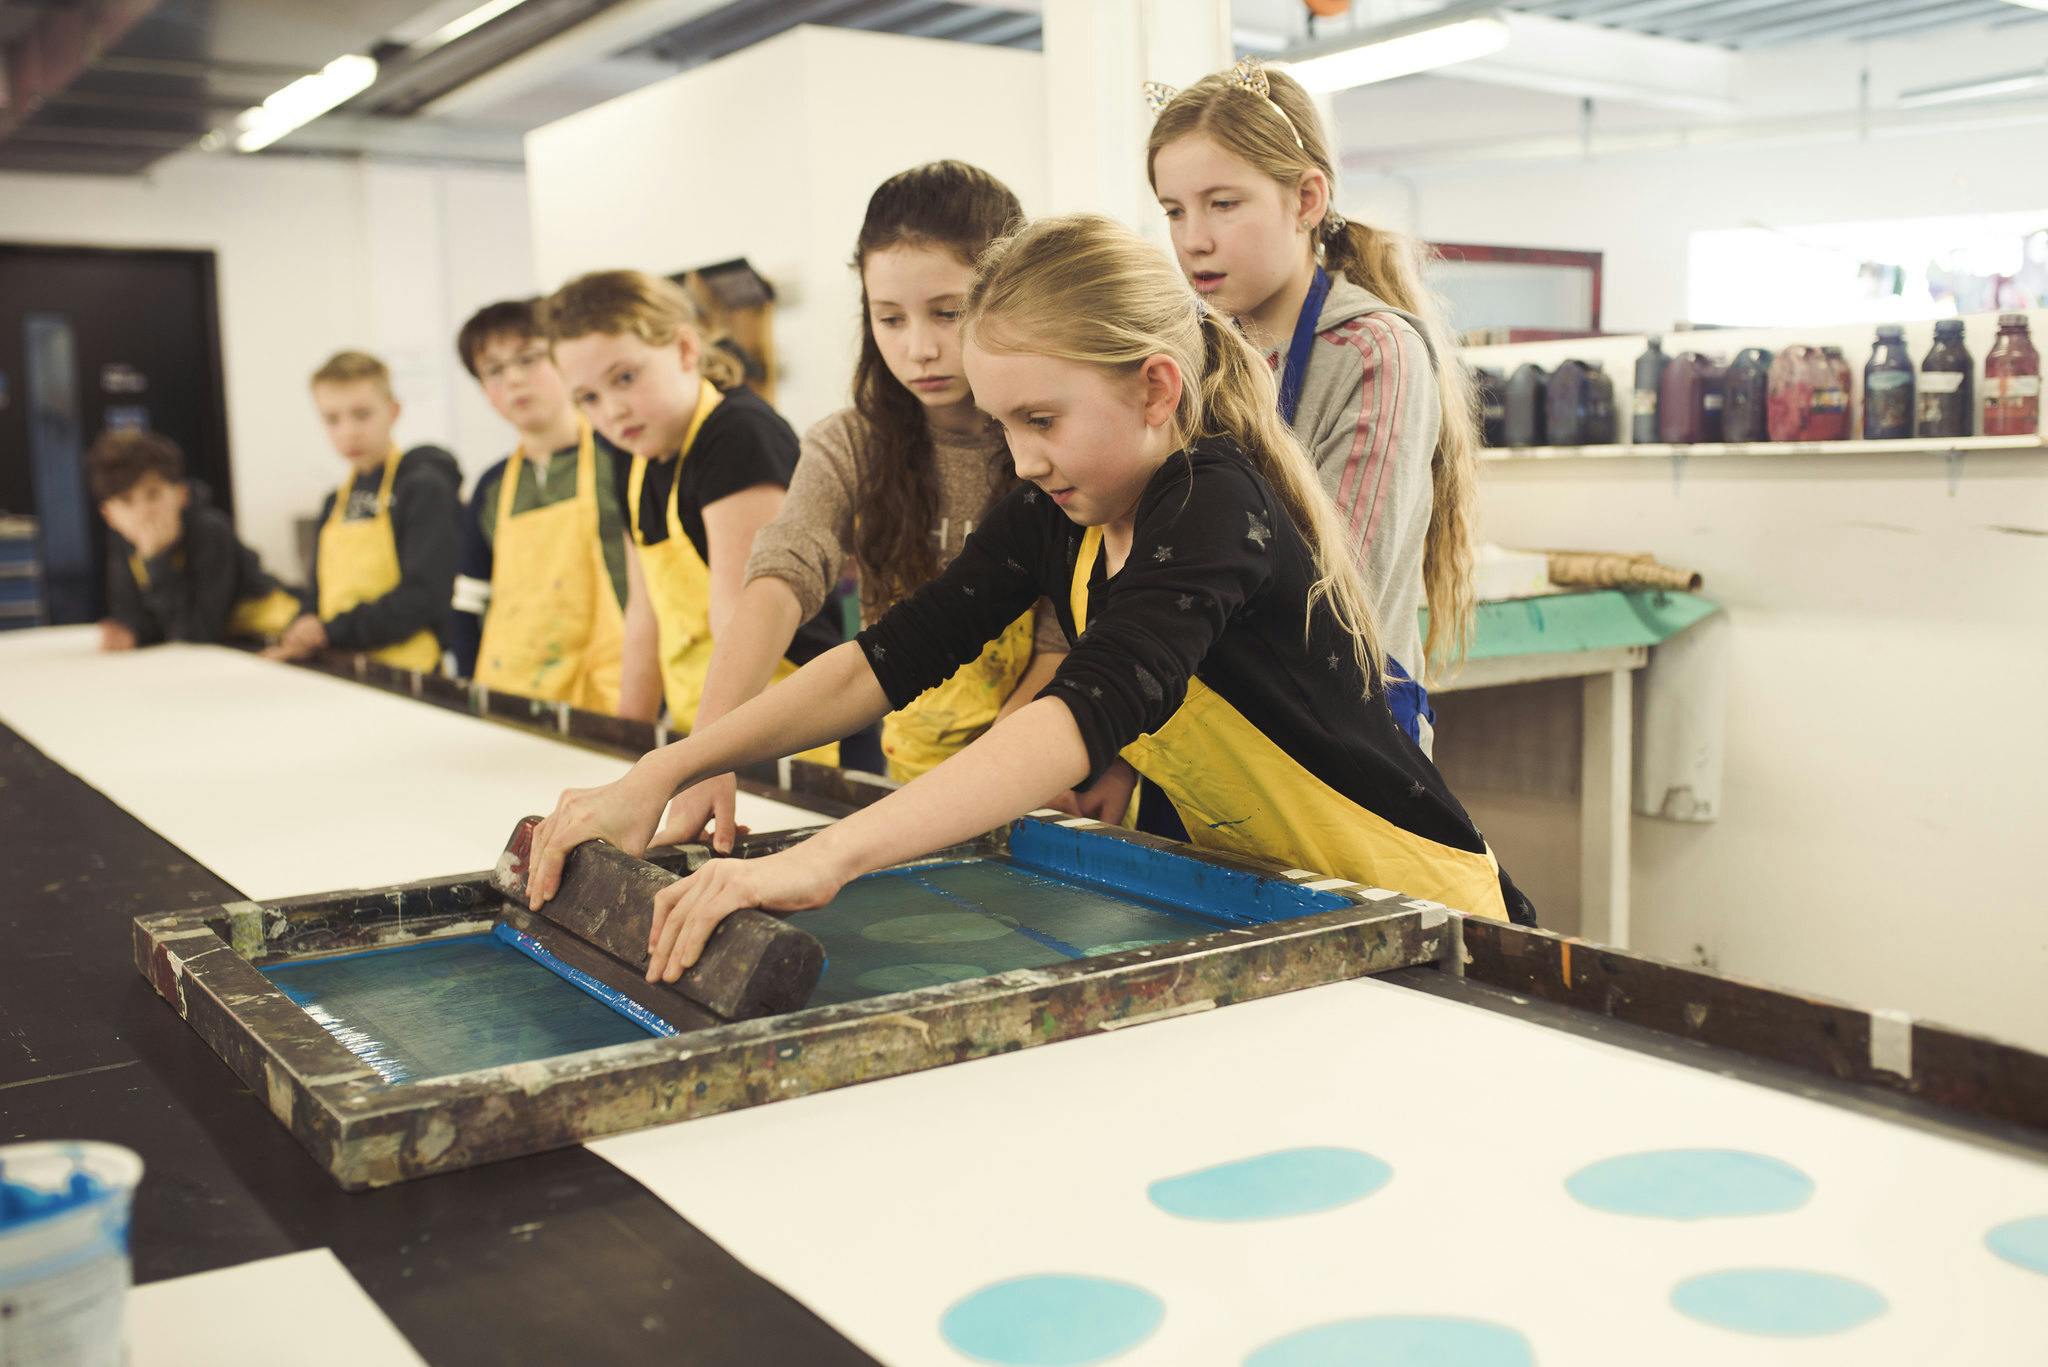 A young girl in a yellow apron holds a squeegee as she pulls it across a printing screen. She's observed by six fellow children in aprons beside a long printing table.